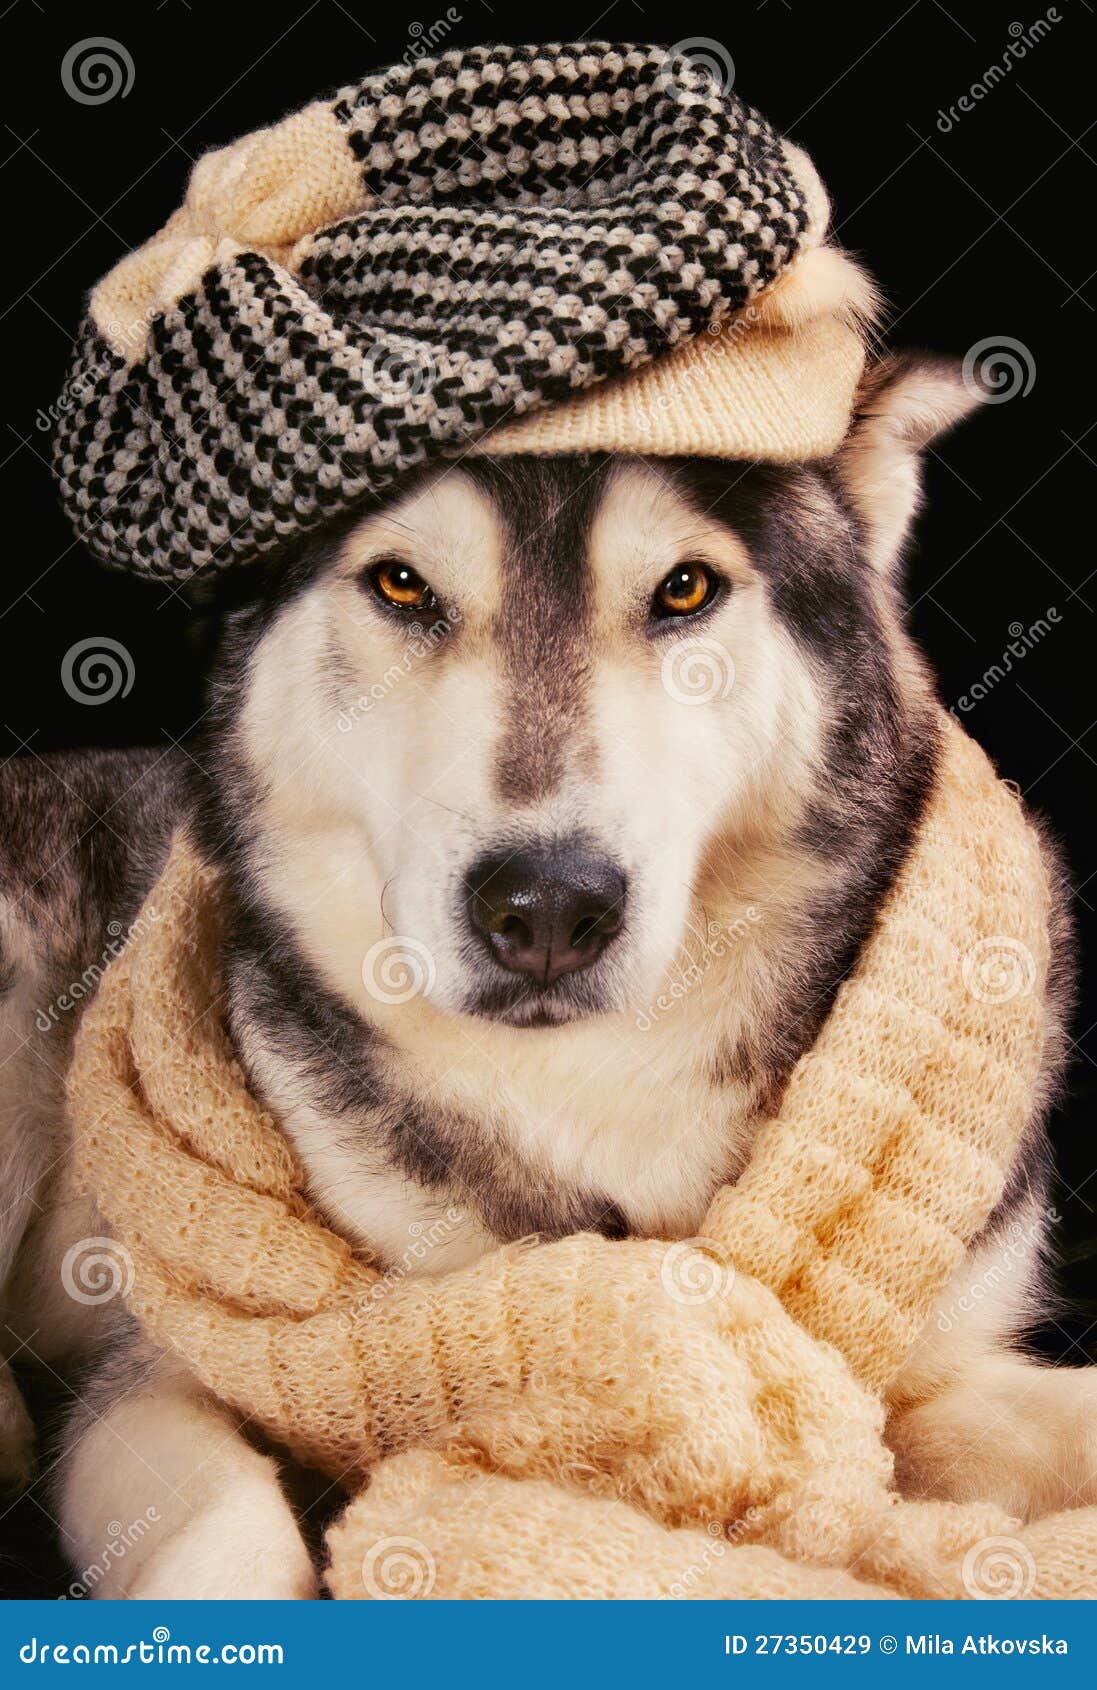 Cute Siberian Husky Wearing a Vintage Hat Stock Image - Image of ...